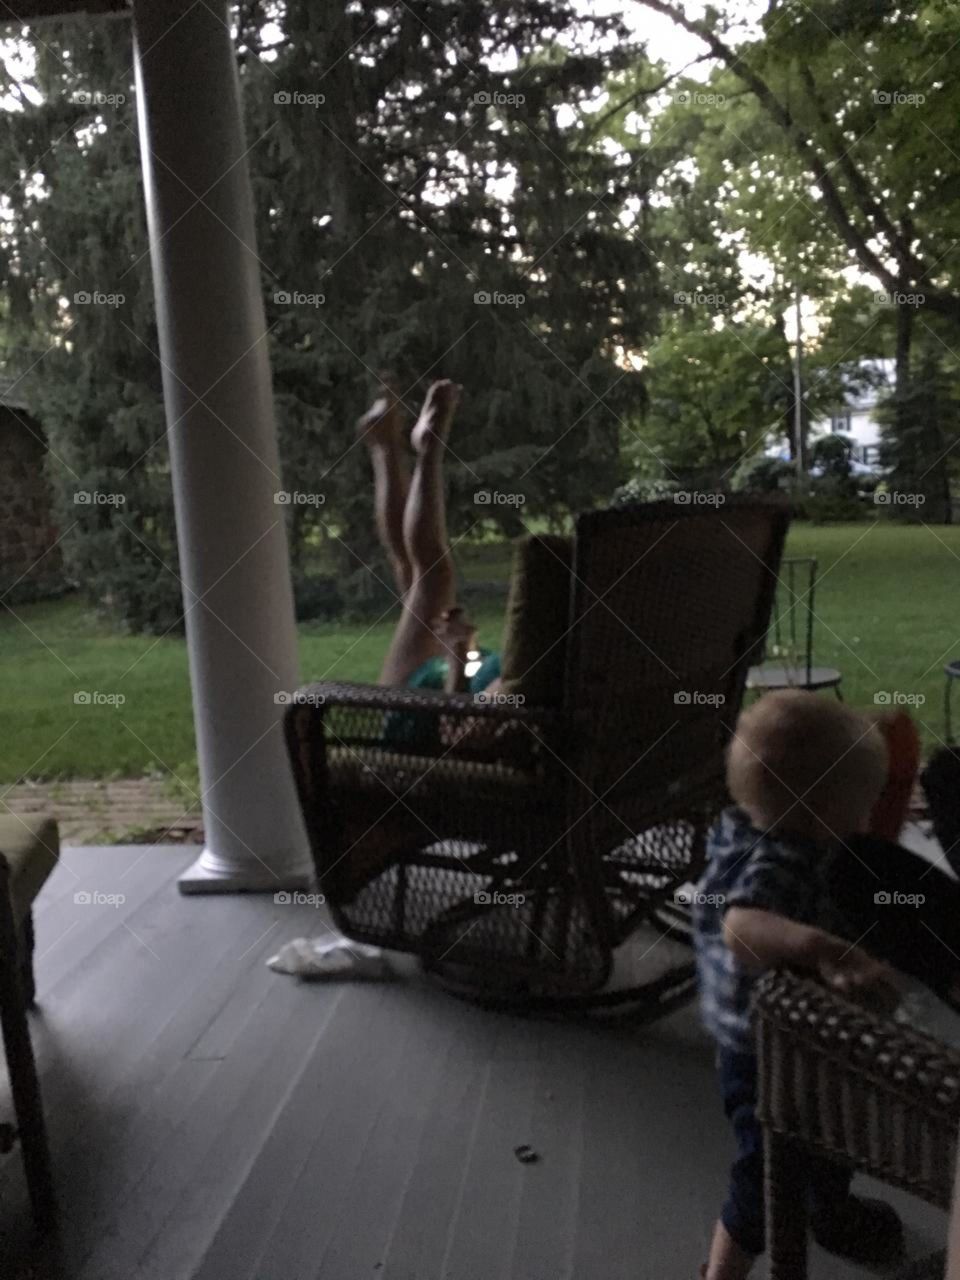 practice playing synchronized swimming on the porch